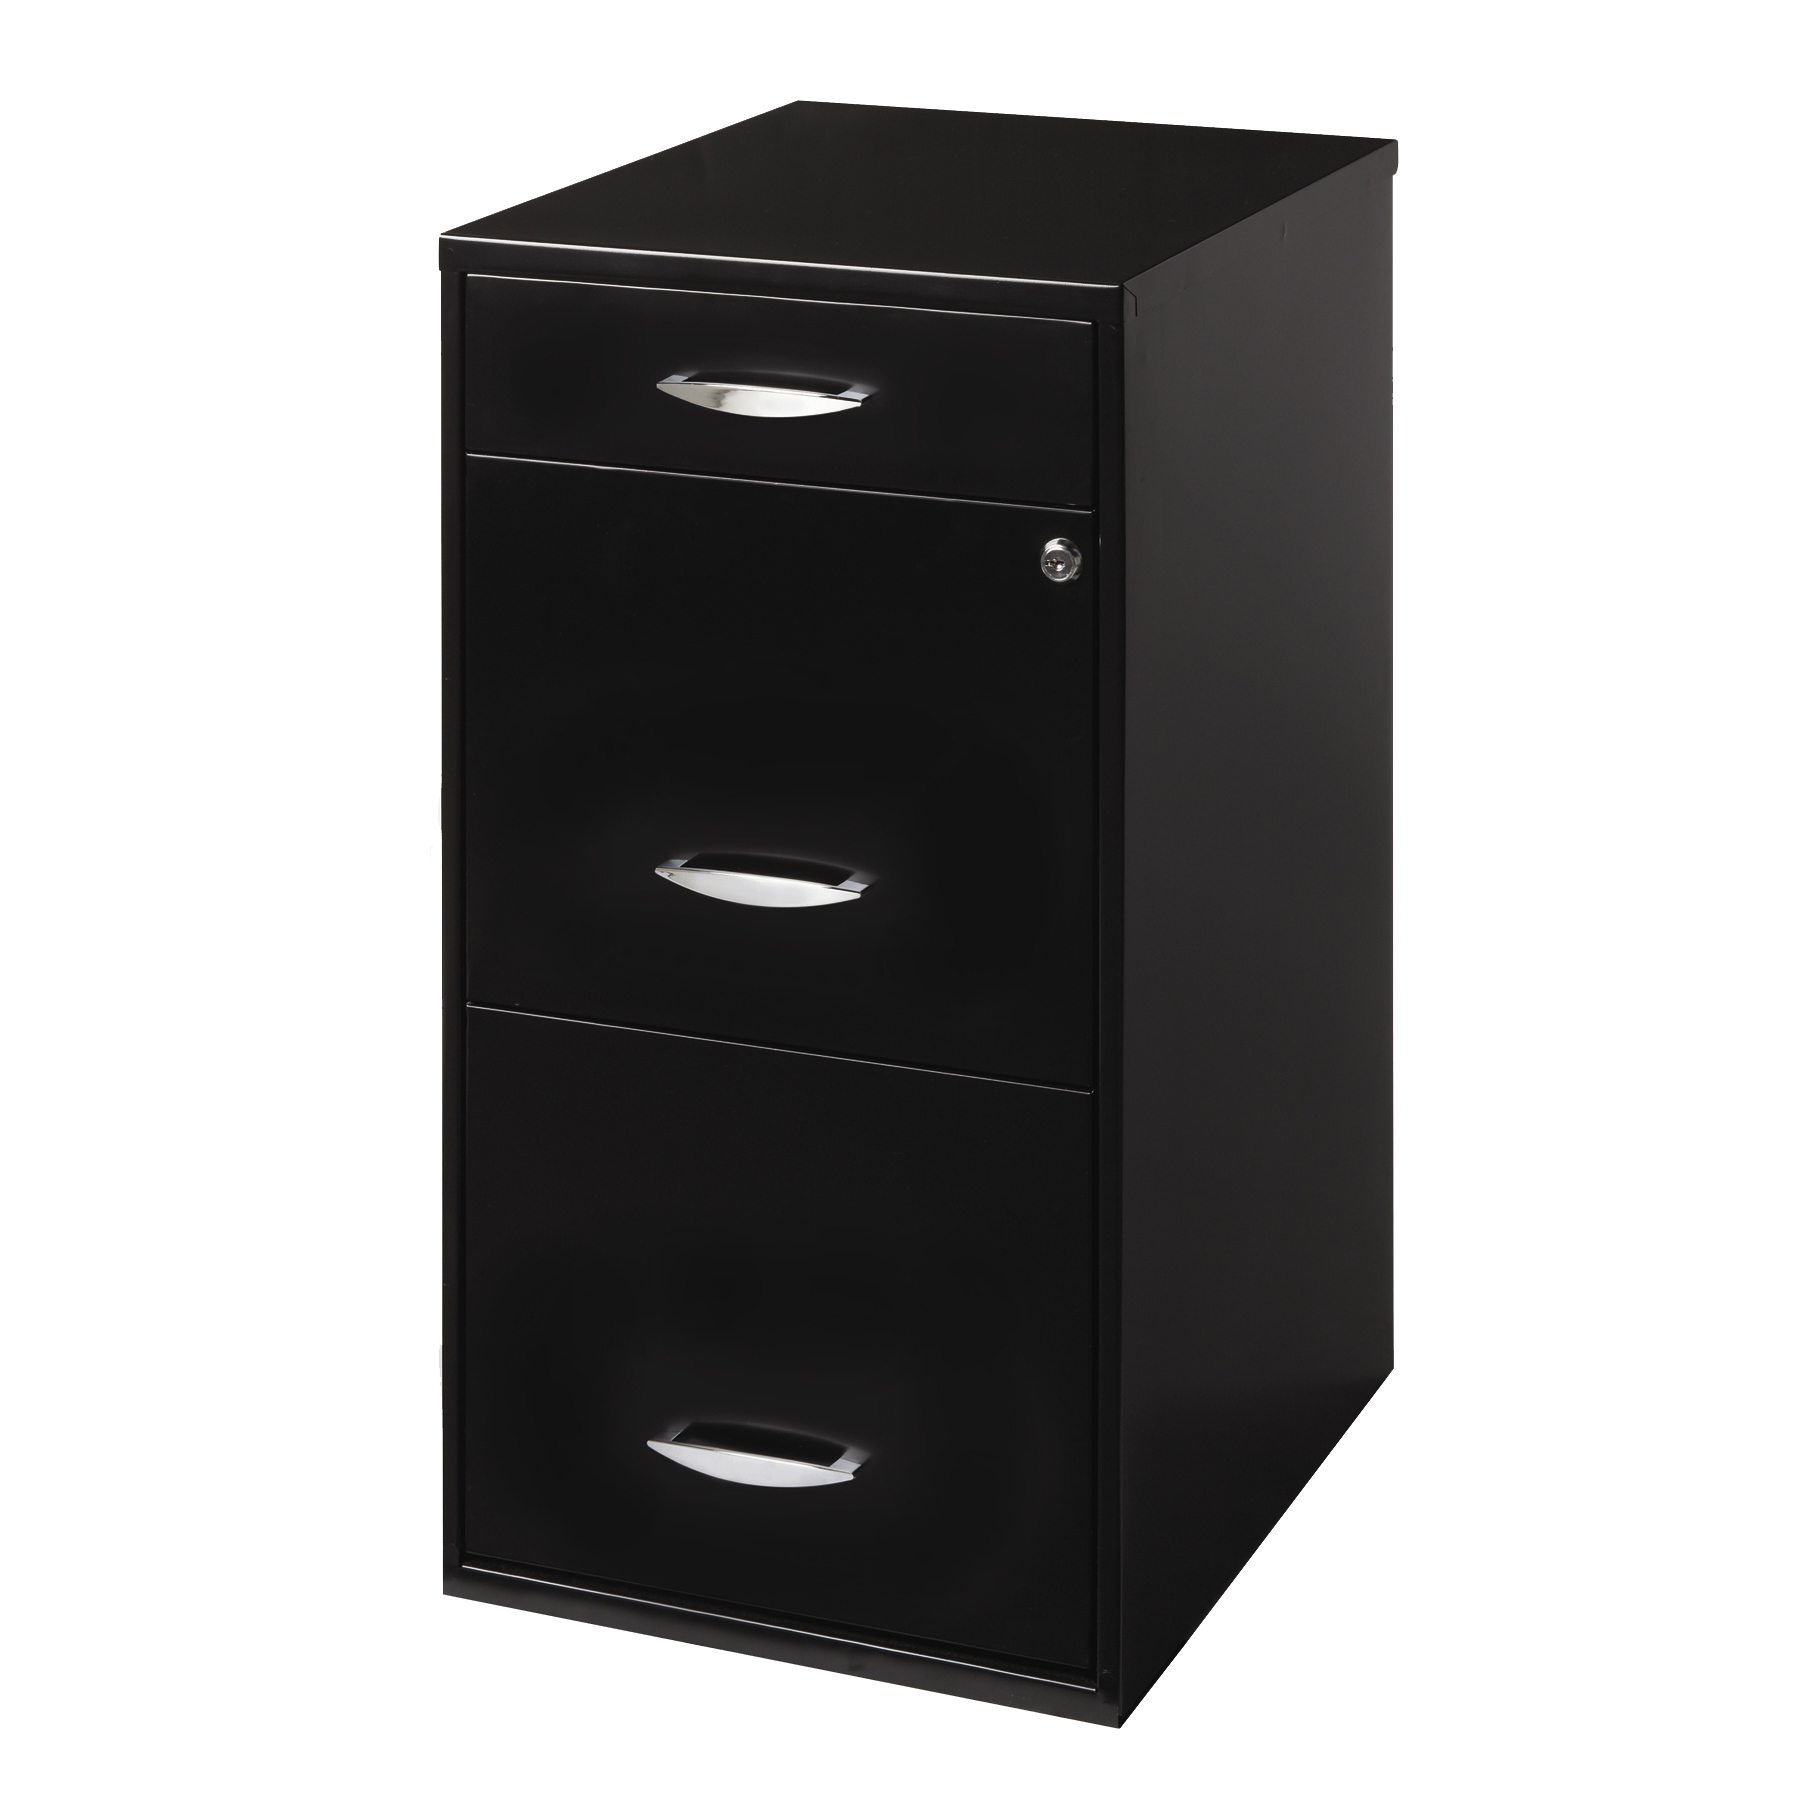 Filing Cabinet 18w 3 Drawer Organizer File Black Walmart intended for dimensions 1800 X 1800